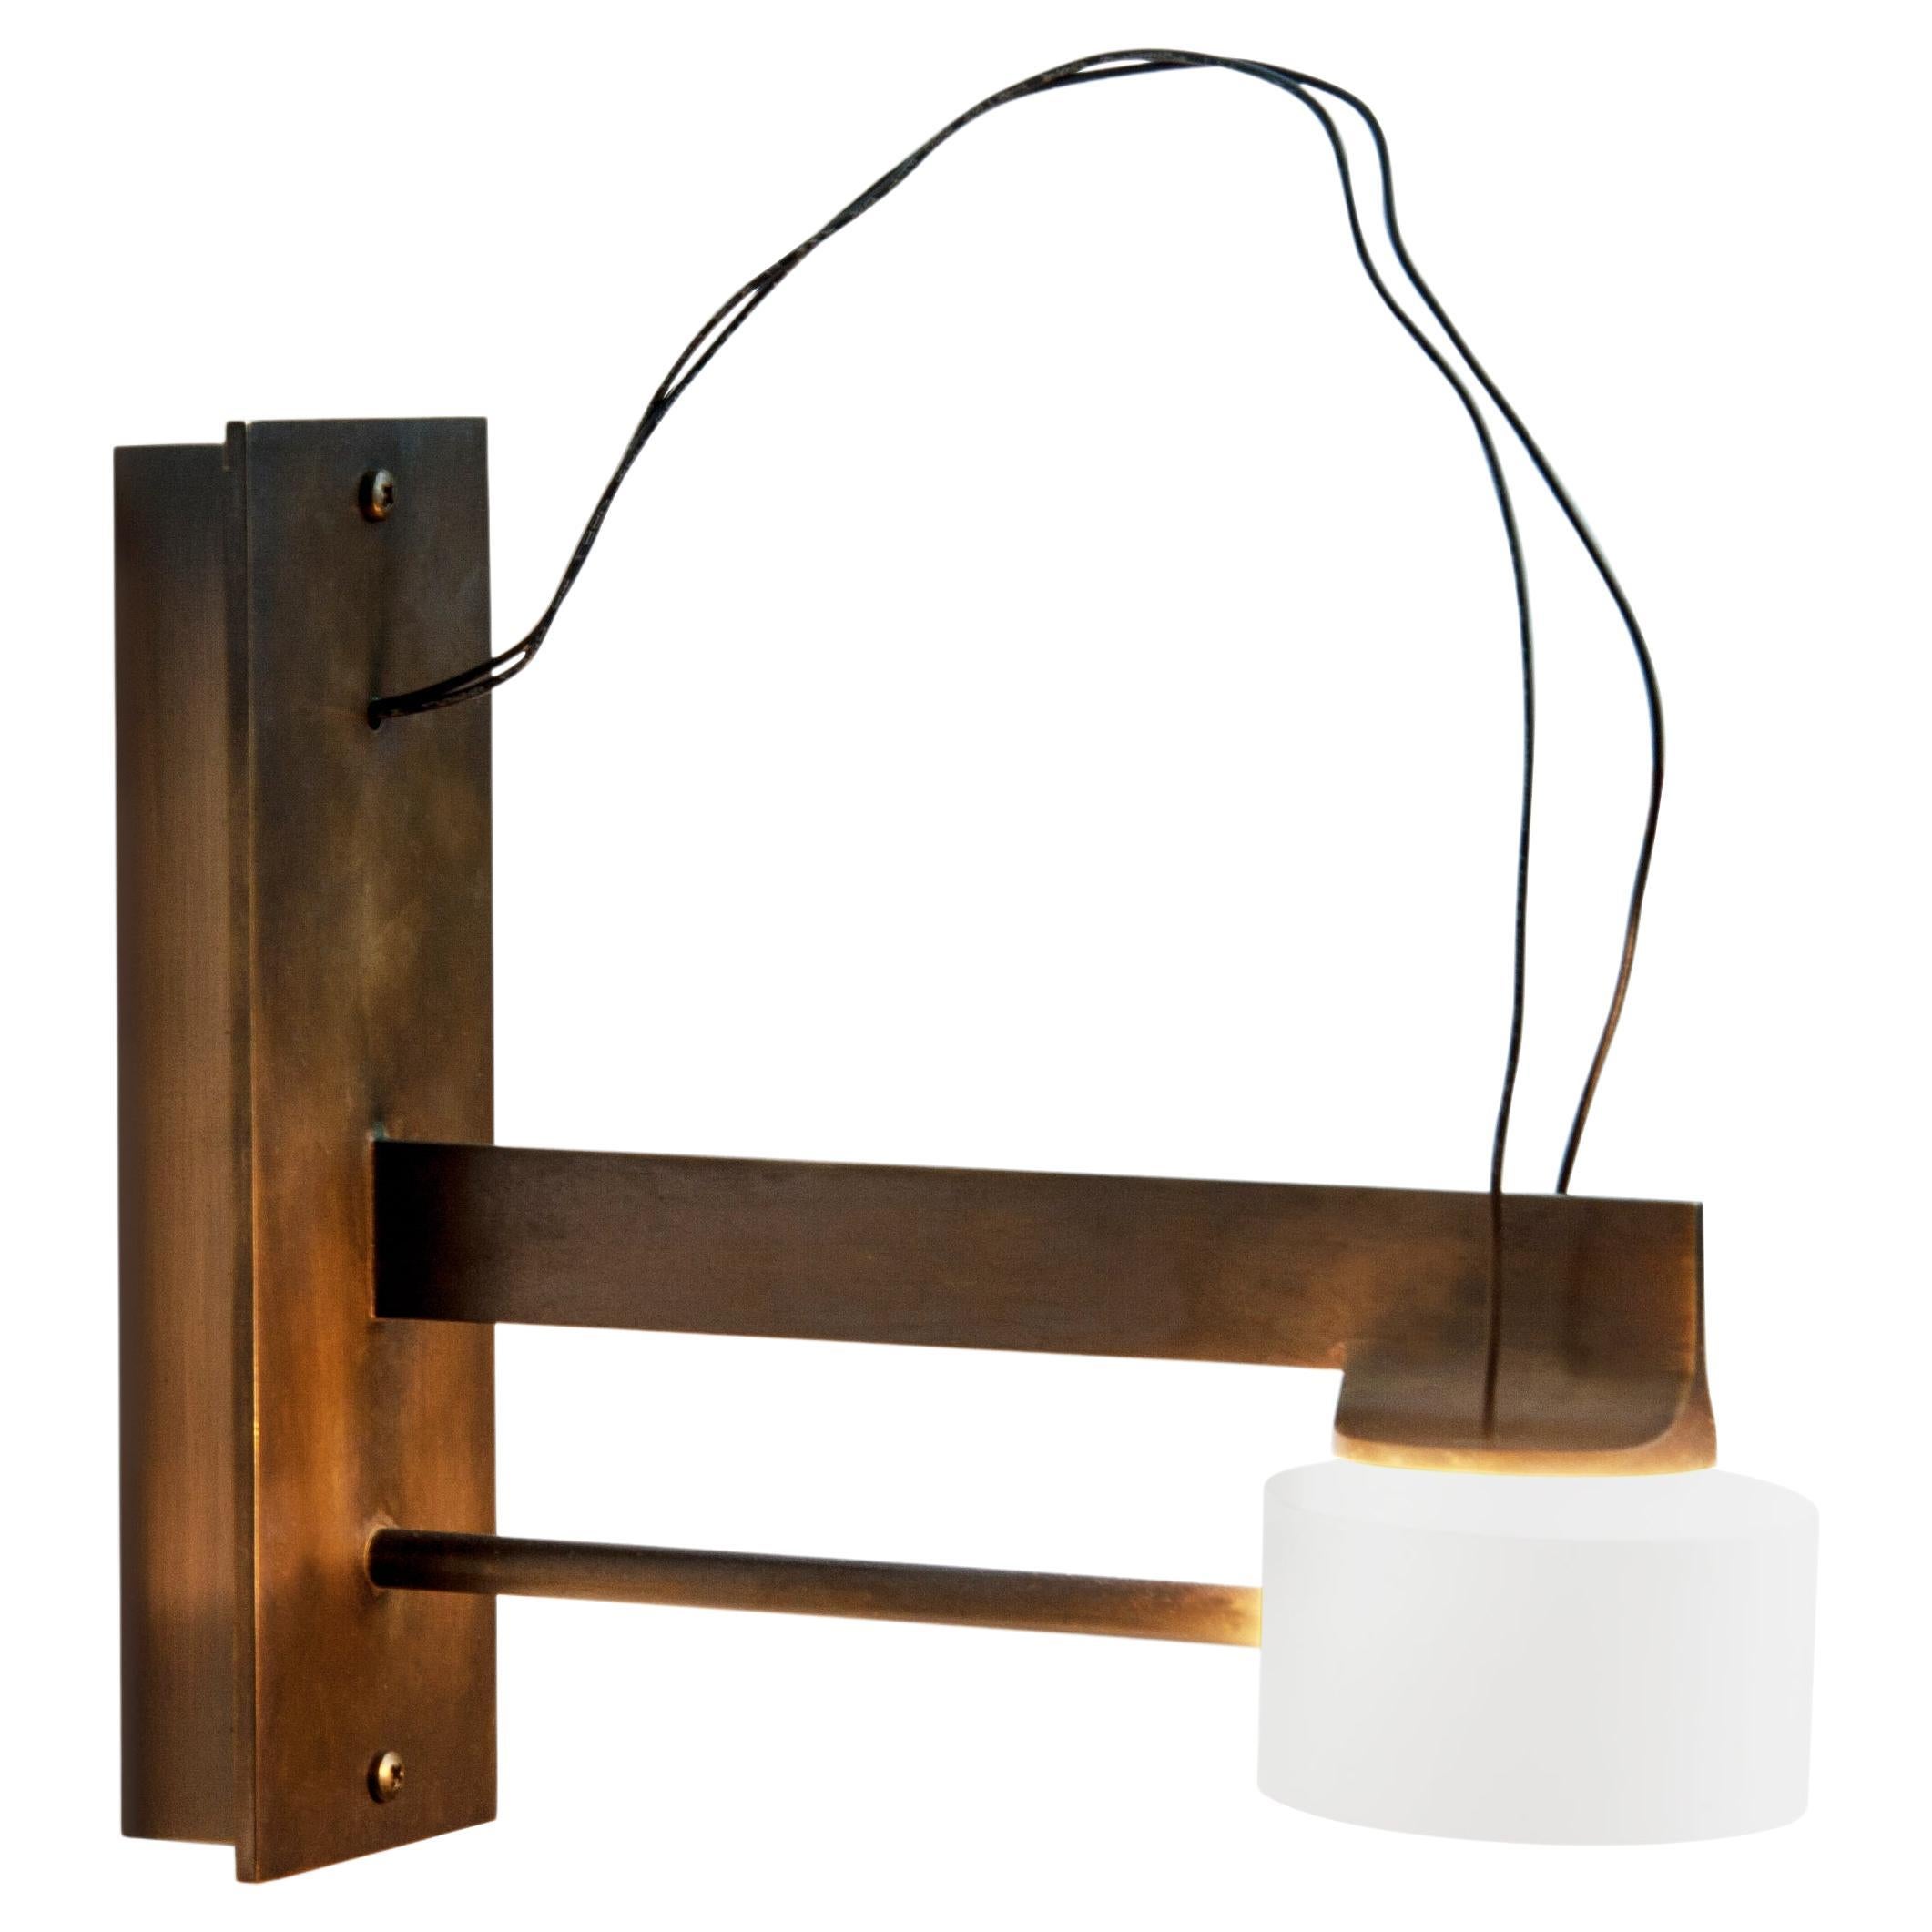 With Wall Lamp by Gentner Design